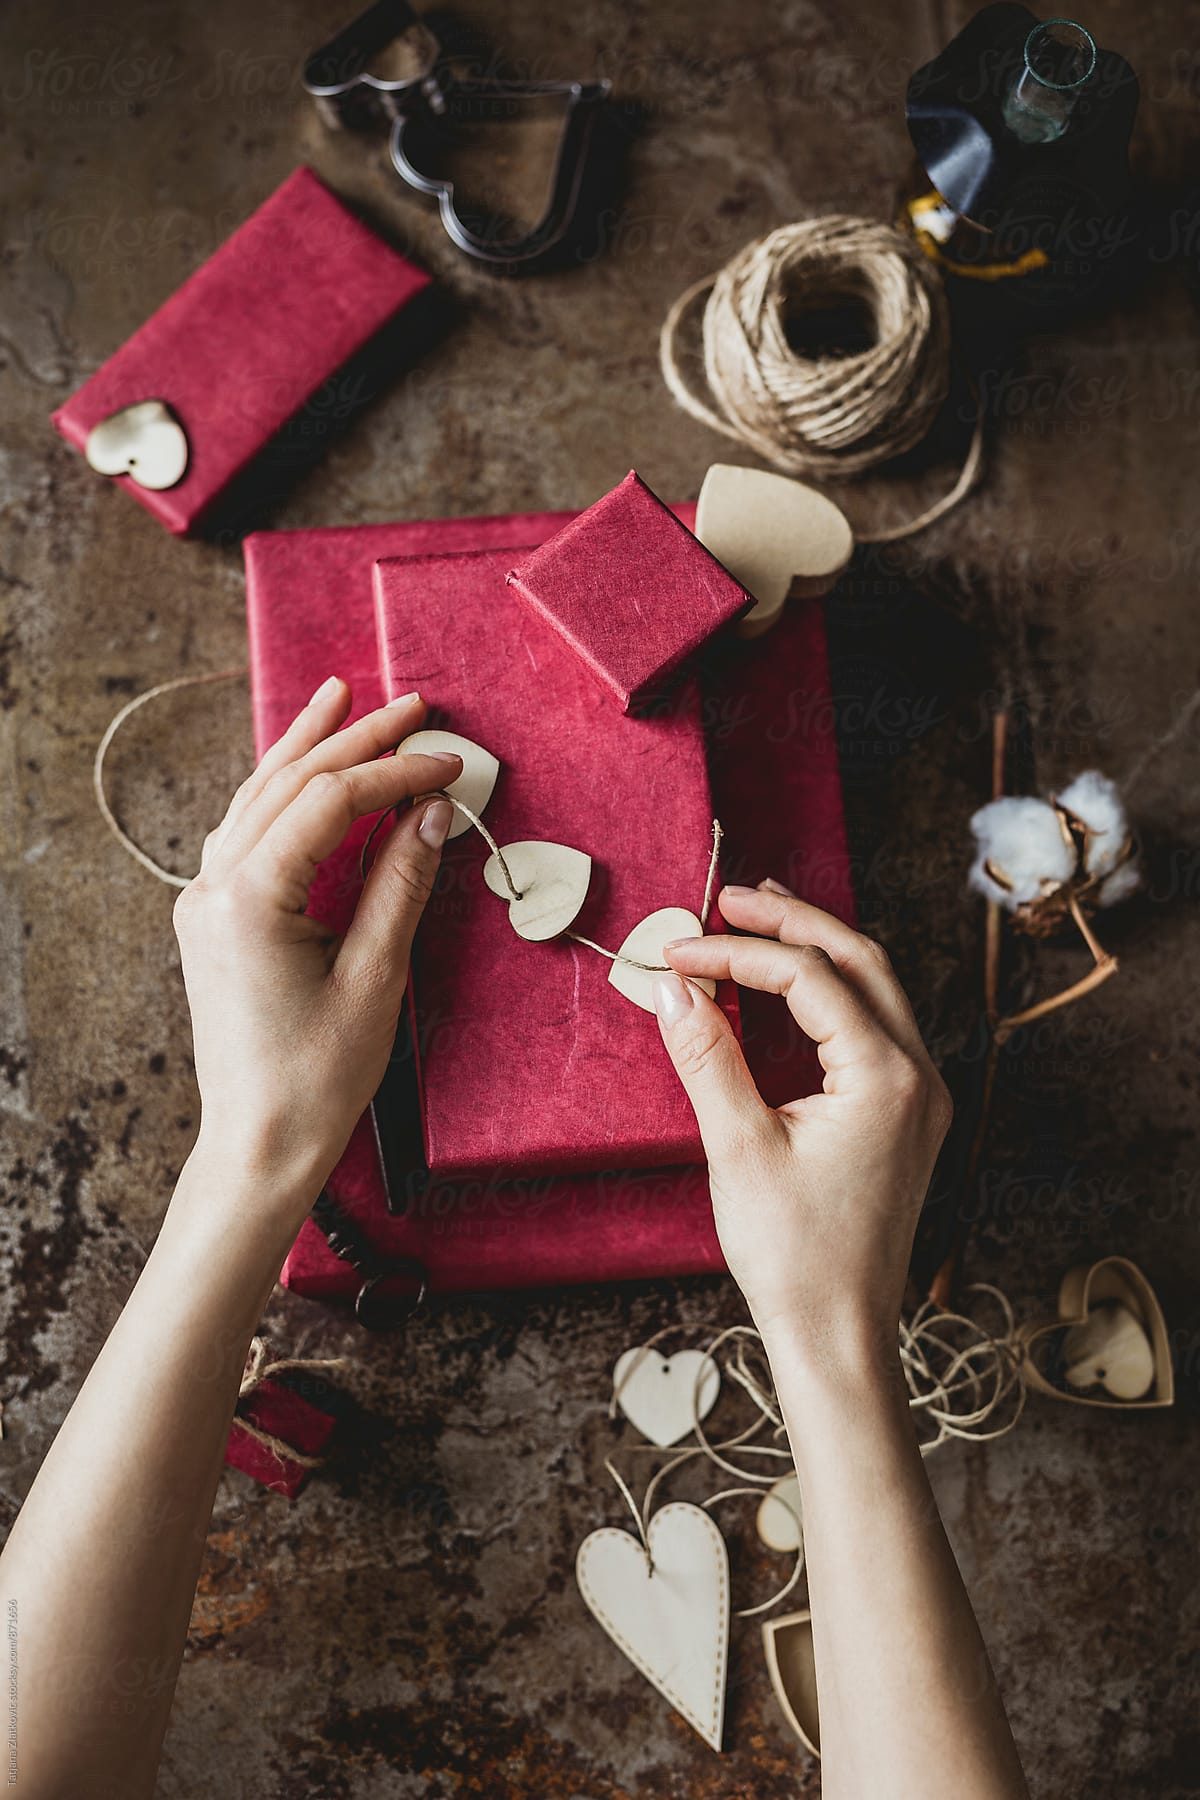 Hands wrapping gifts for Valentine's Day